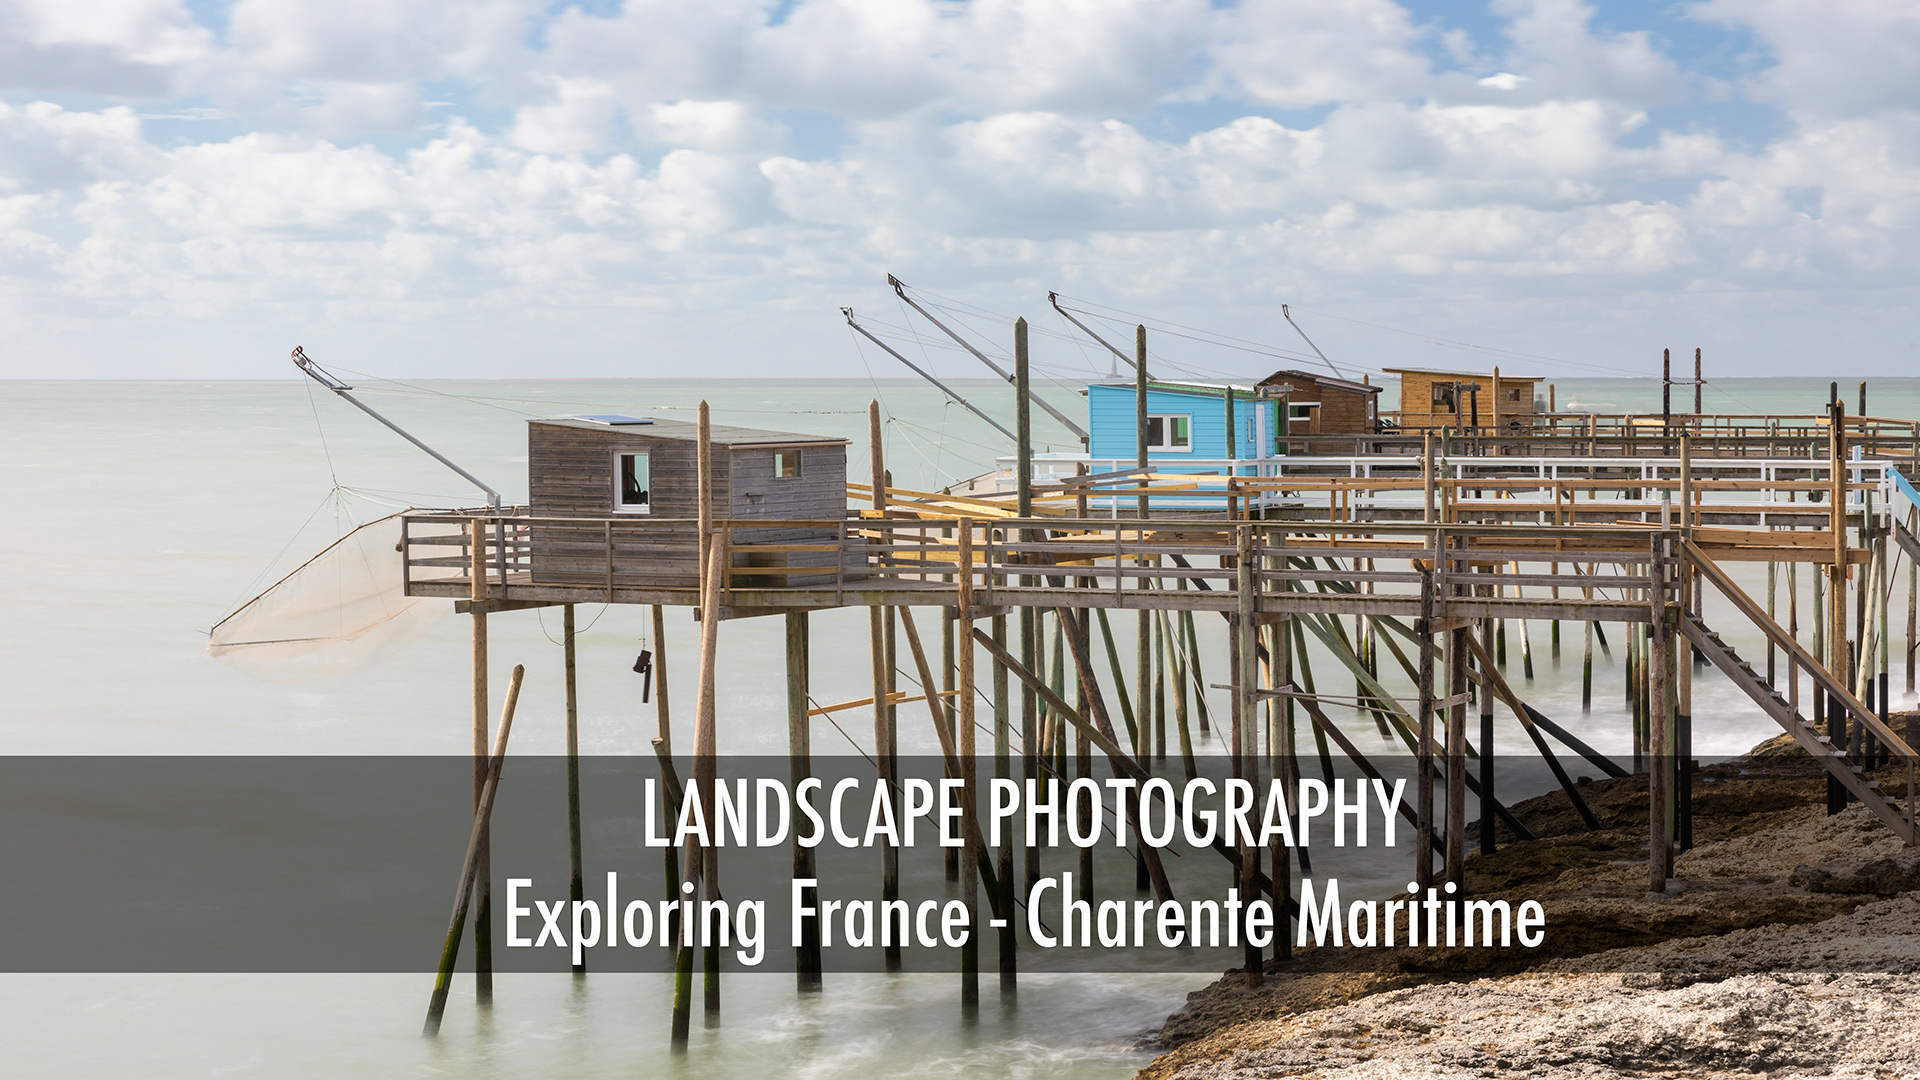 Exploring France in the department of Charente Maritime. Landscape photography.